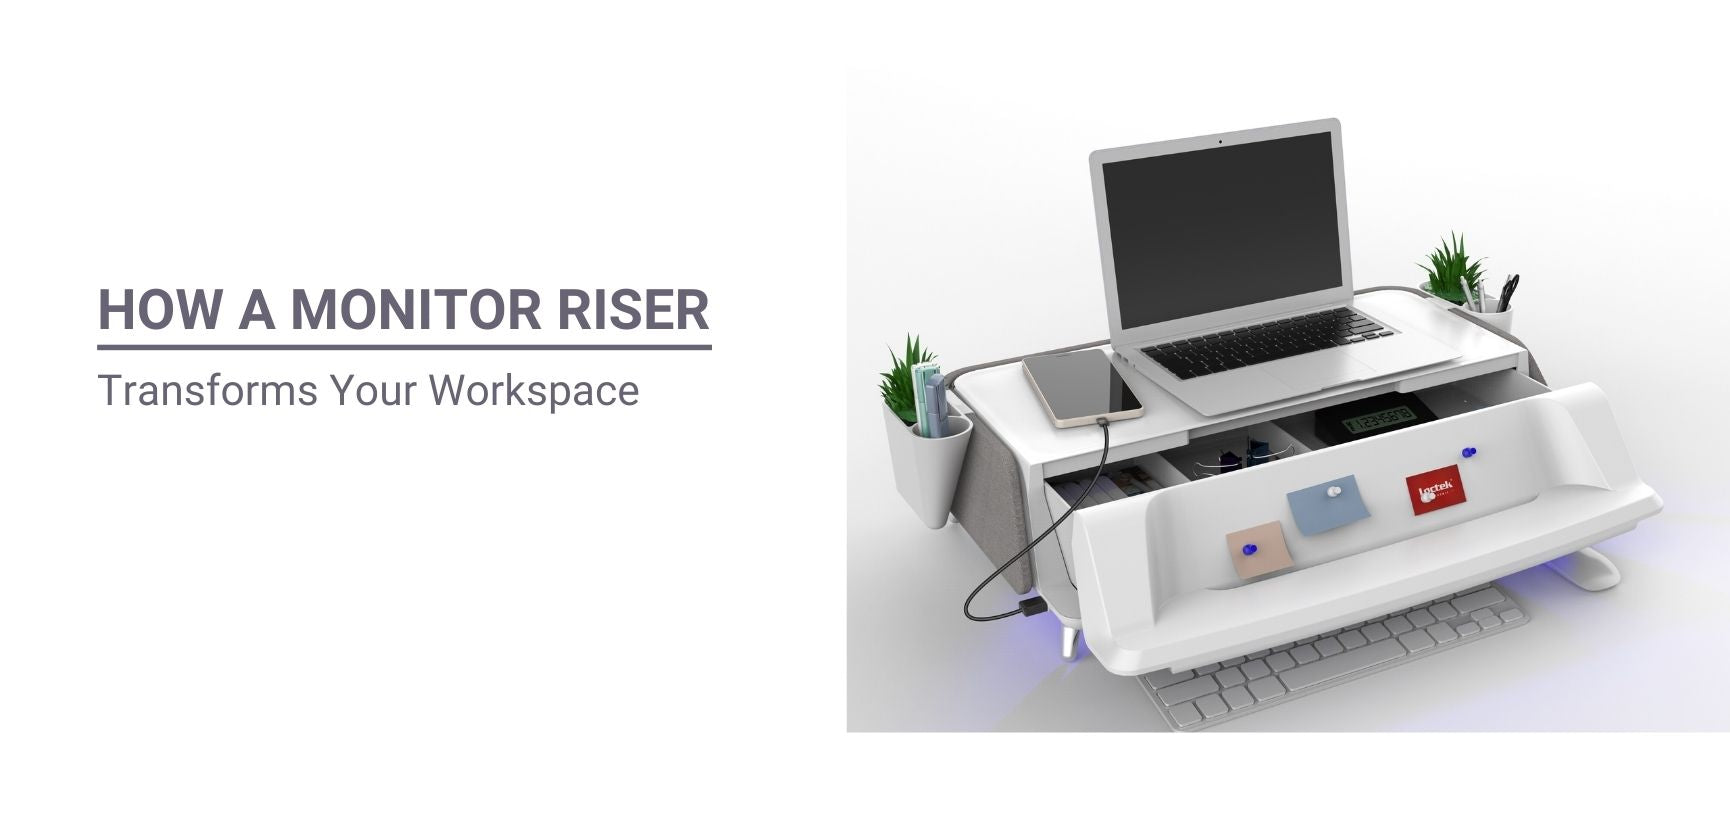 How a Monitor Riser Transforms Your Workspace